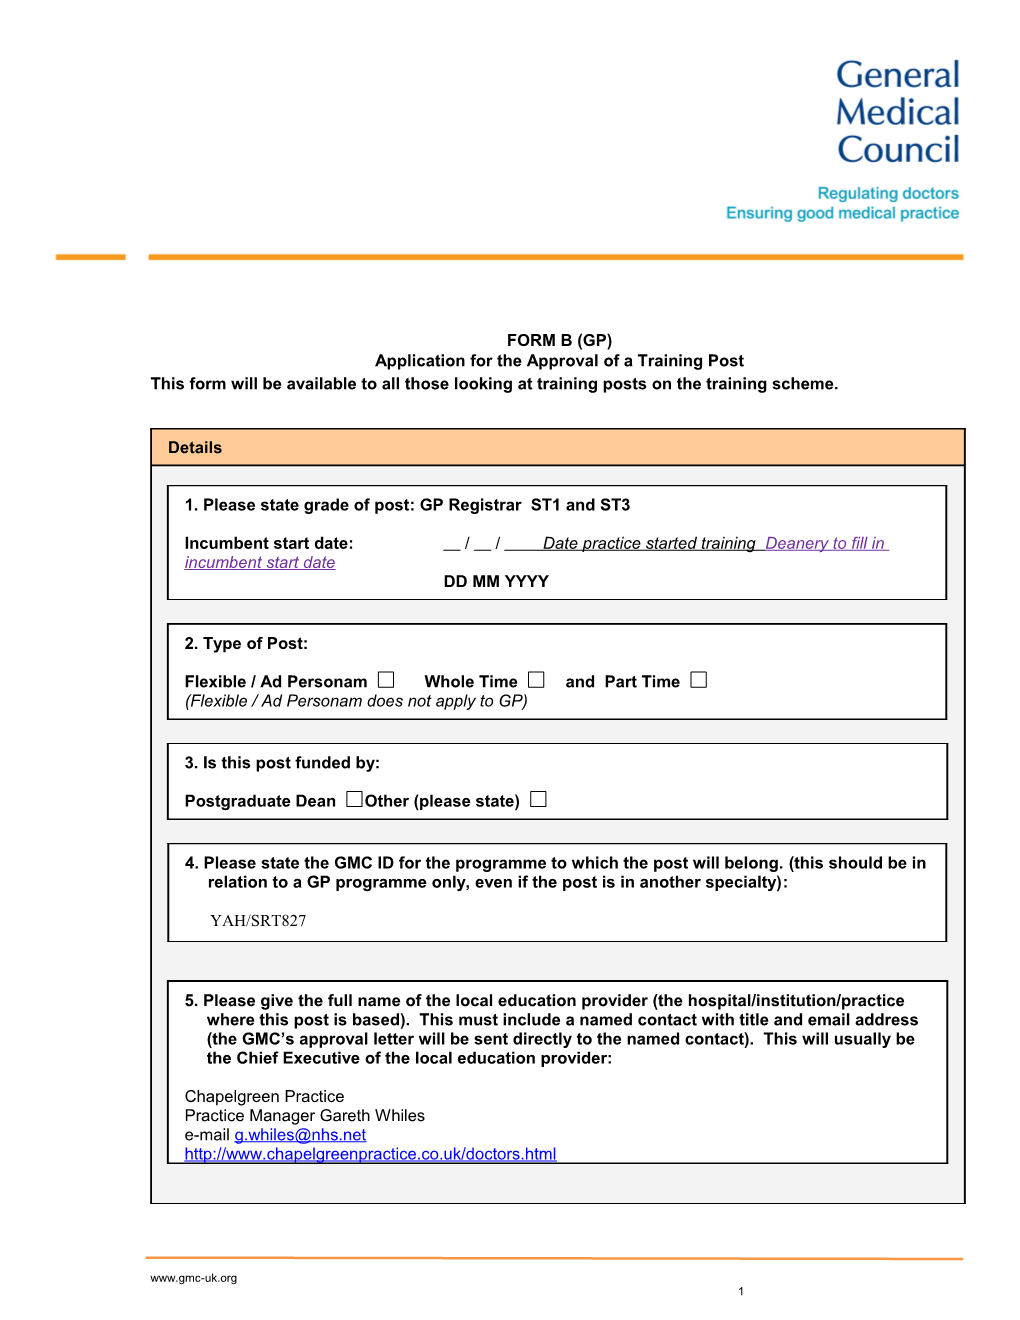 Quality Framework Operational Guide - Annex 4: Application for the Approval of a New Training